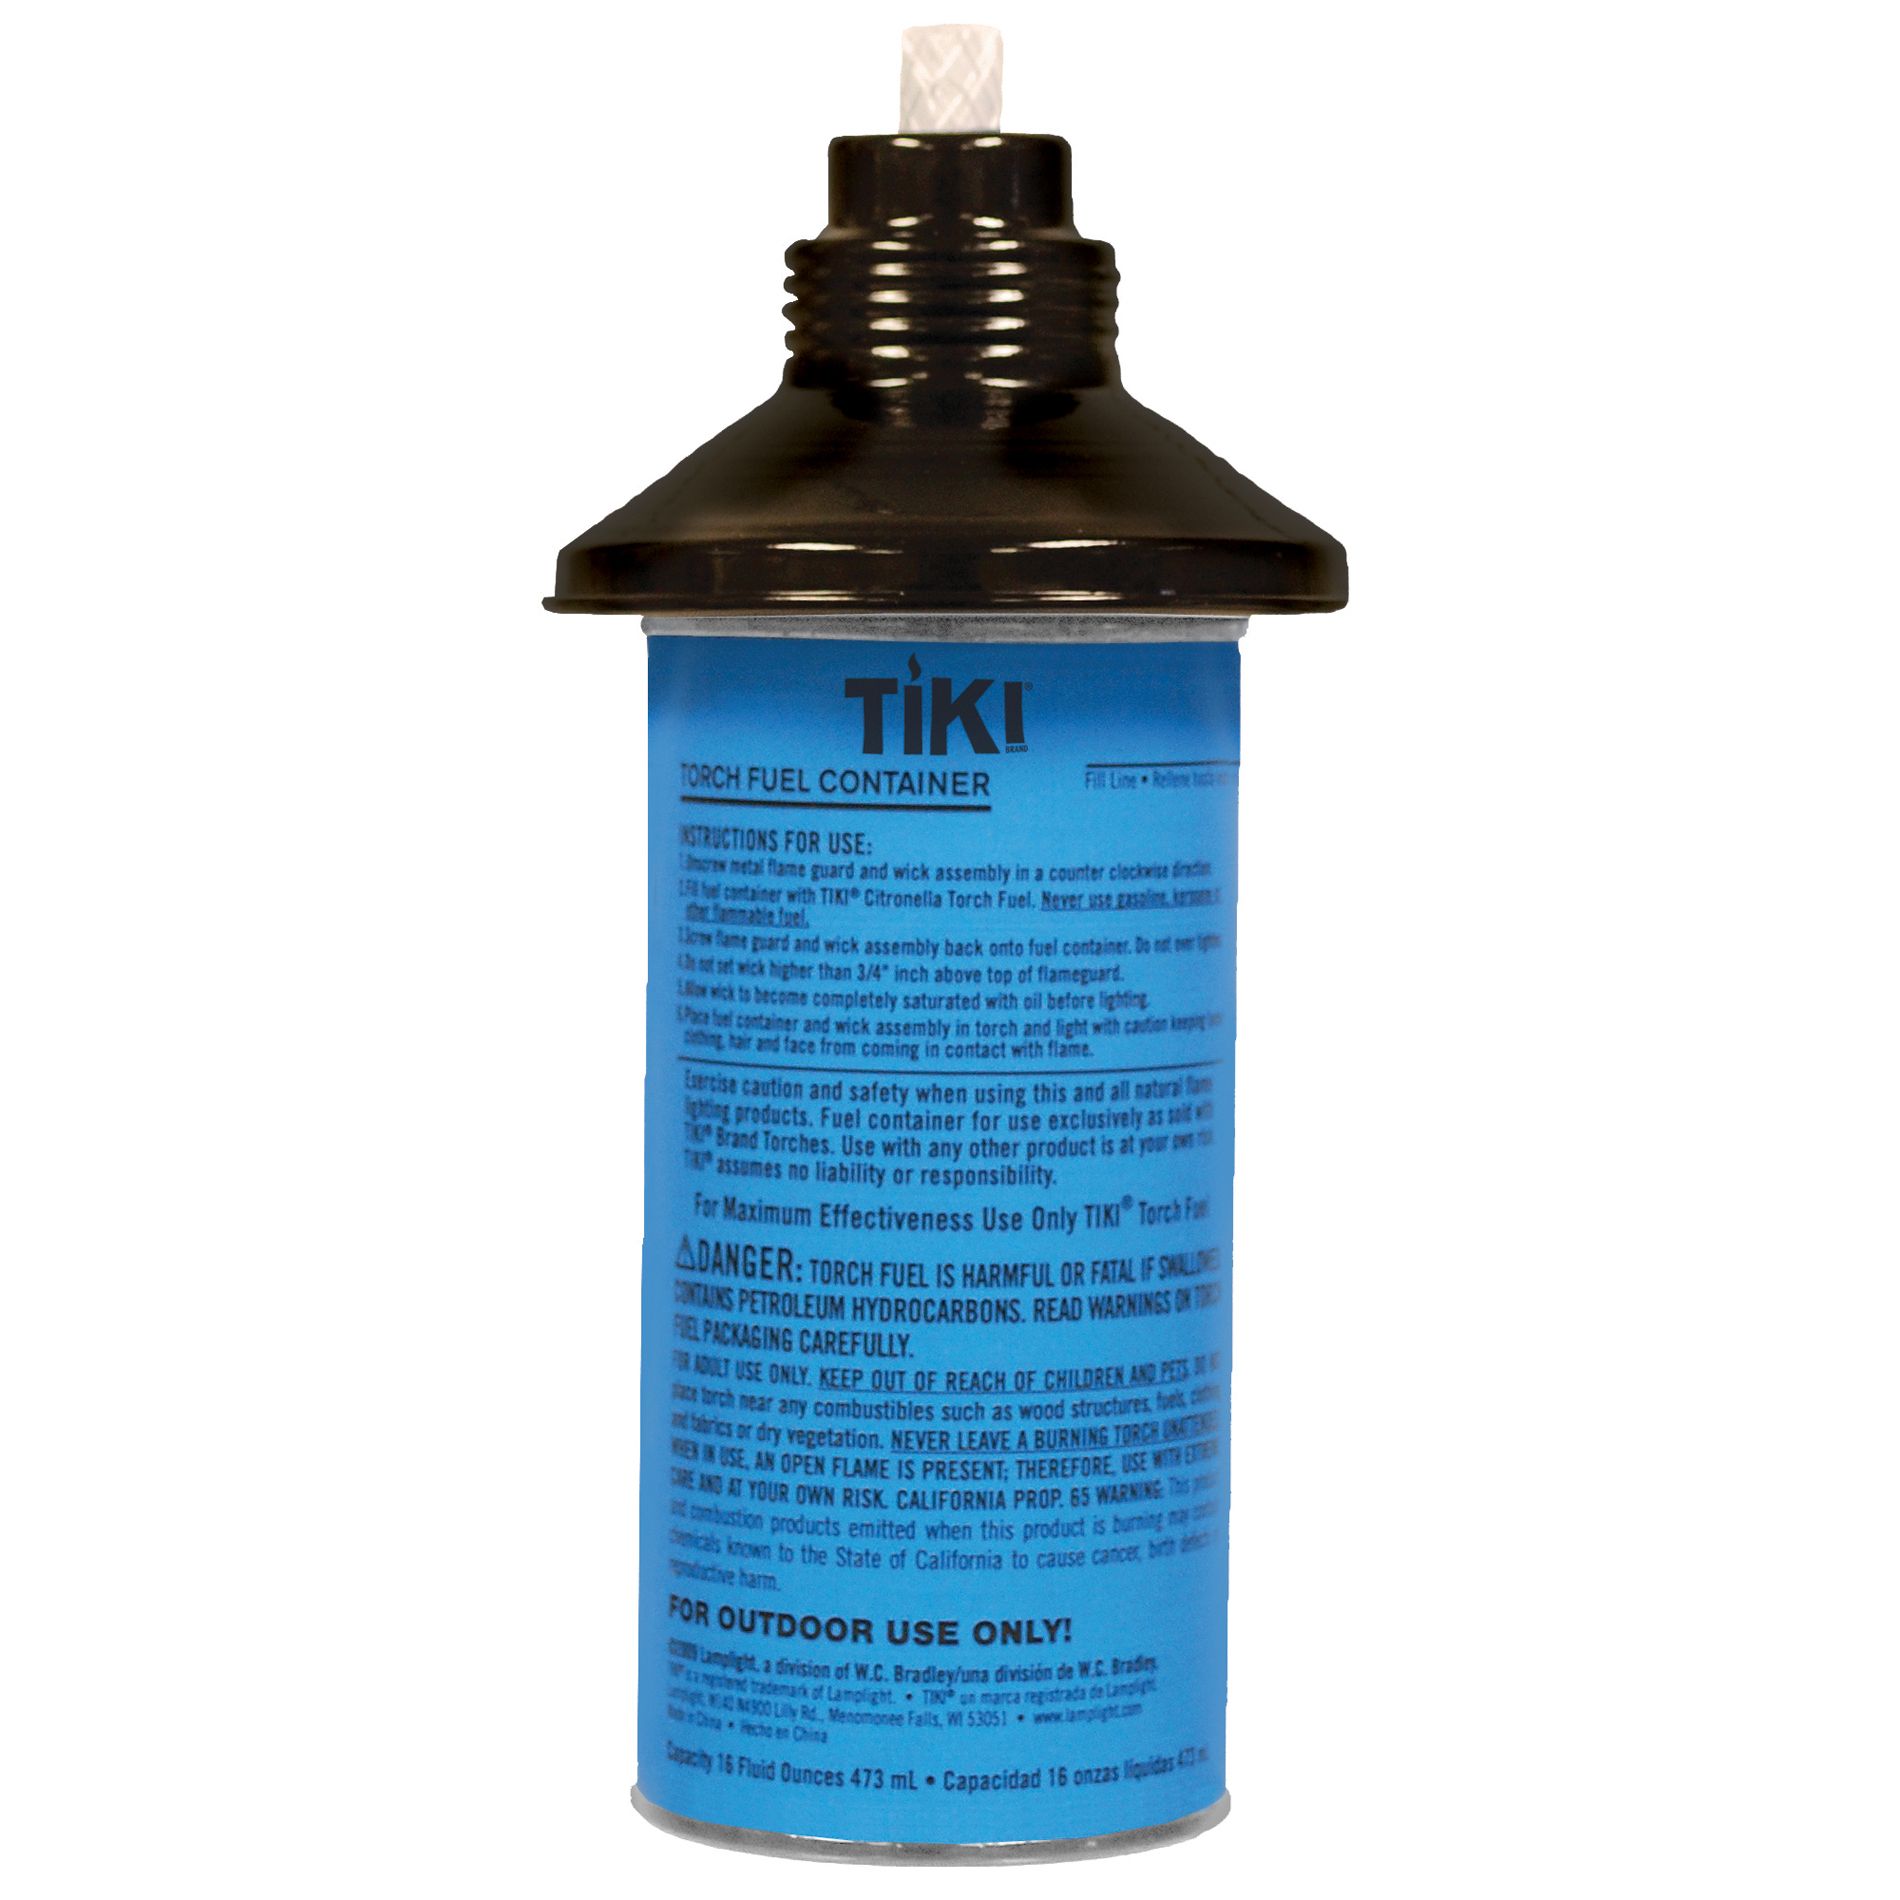 Tiki Replacement Metal Torch Canister with Wick